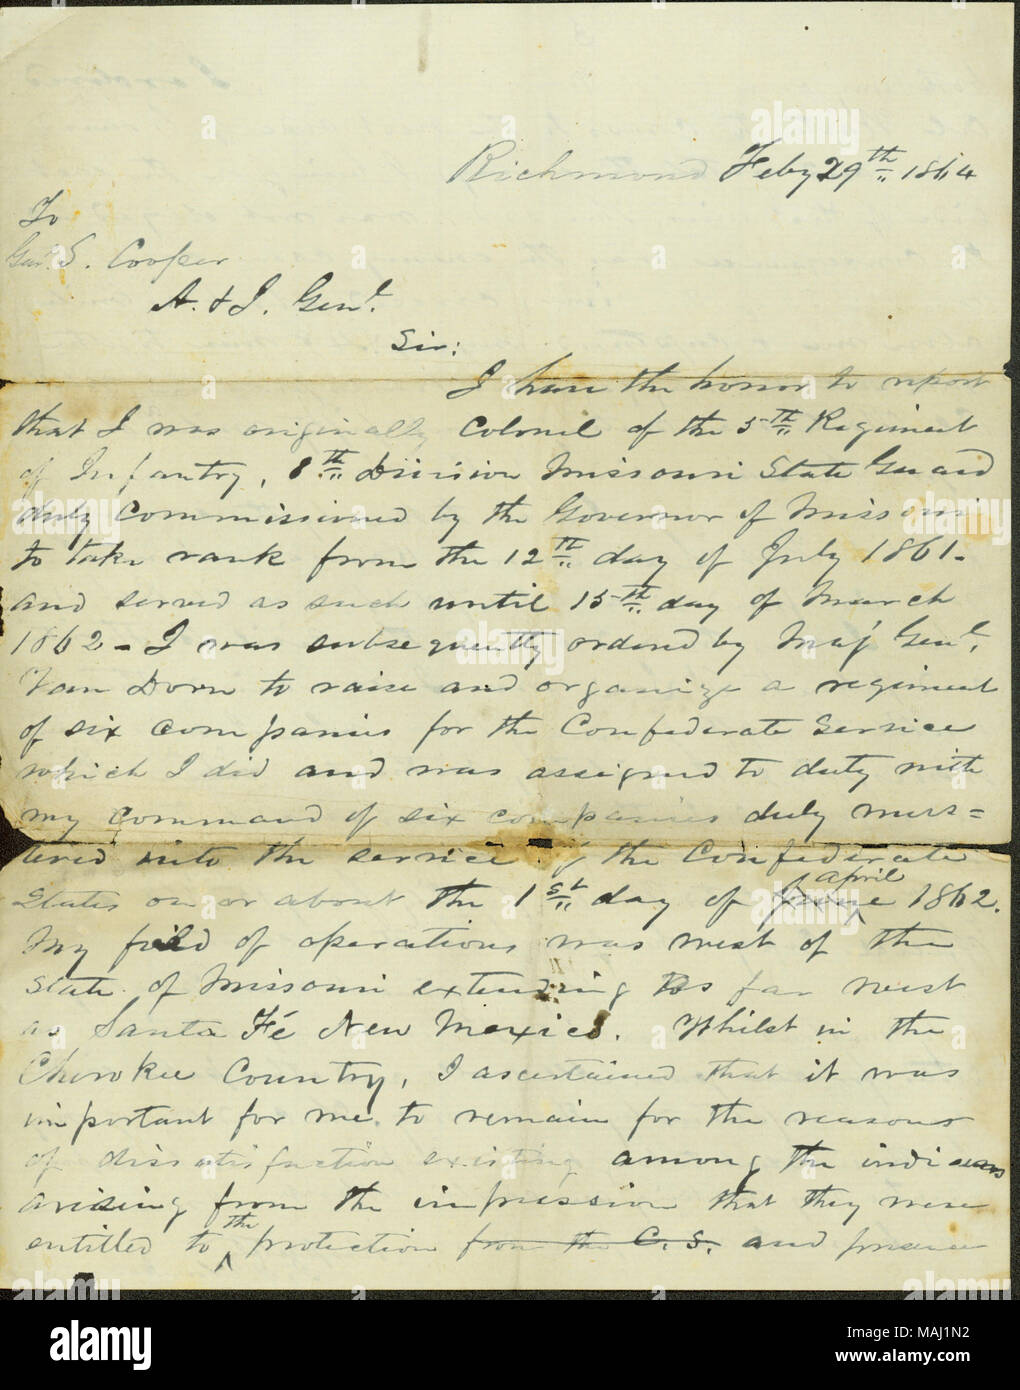 Recounts his military service in the Missouri State Guard and later in the Cherokee country; his capture while en route to Fort Smith, Ark., as a result of Colonel Stand Watie's disobedience of his orders; and his subsequent imprisonment.  Transcription: Richmond Feby 29th 1864 To Genl. S. Cooper A [and] J. Genl. Sir: I have the honor to report that I was originally colonel of the 5th Regiment of Infantry, 8th Division Missouri State Guard duty Commissioned by the Governor of Missouri to take rank from the 12th day of July 1861. and served as such until 15th day of March 1862  ? I was subseque Stock Photo